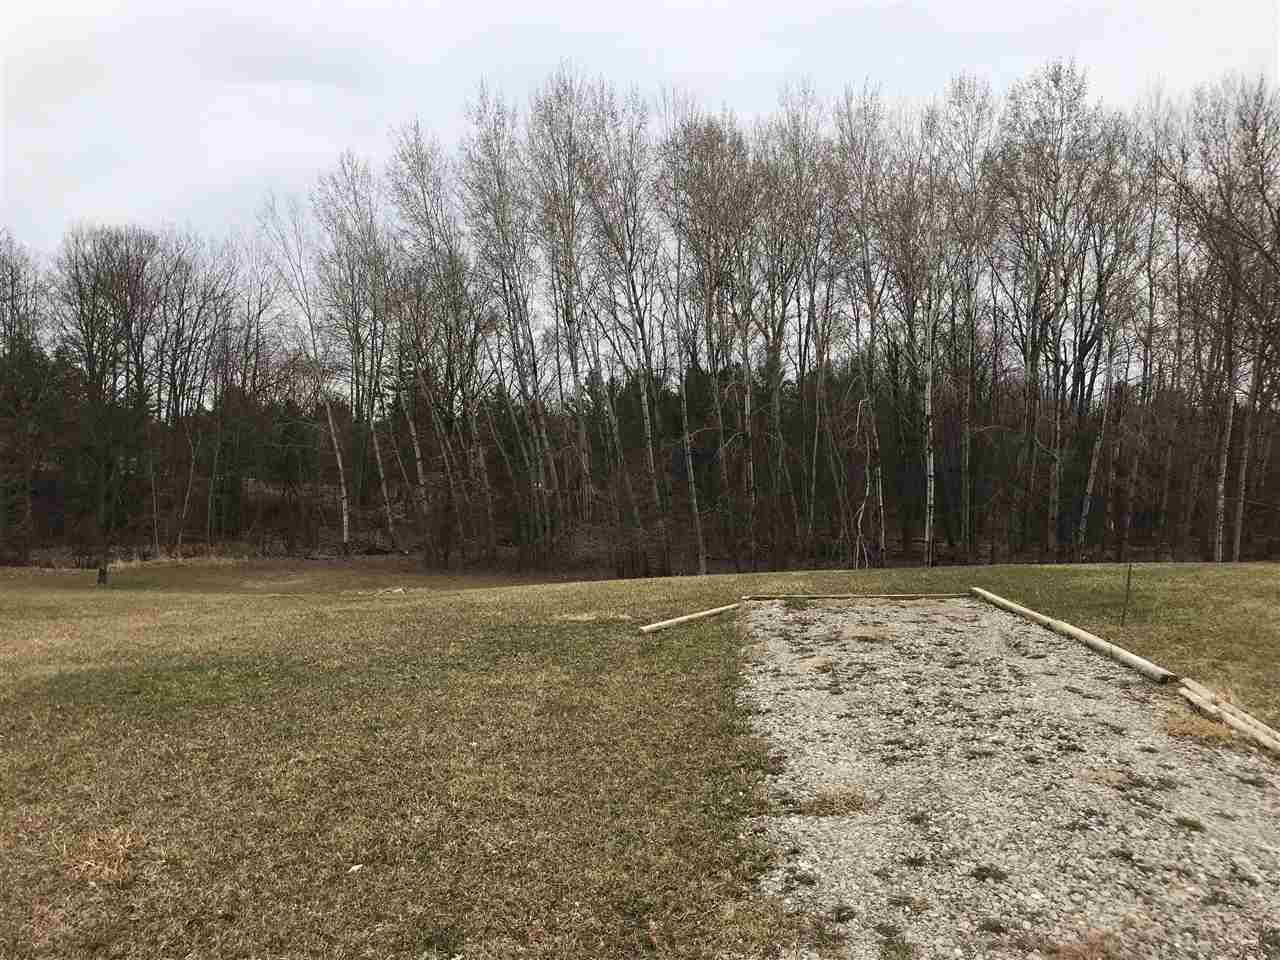 Nice cleared lot that has electric hookup and drive. Lot backs up to a common area with a creek  in a nice location for building or camping.  Please review the 2021 SSPOA Regulations & Policies and the sewer requirements.  Ownership provides access to an 18 hole golf course , restaurant/pub, fitness center, indoor heated pool, tennis/bocce ball courts, chalet/sledding hill, walking (nature) trails, activity bldg, storage area, 2 all sports lakes, Lk Lancer/Lancelot, 15 beach clubs (5 with beach/bath house). Or fly to/from Sugar Springs off a 3500ft well maintained grass airpark.   www.airnav.com   5M6.    ALL just 2-1/2 hours from Detroit!